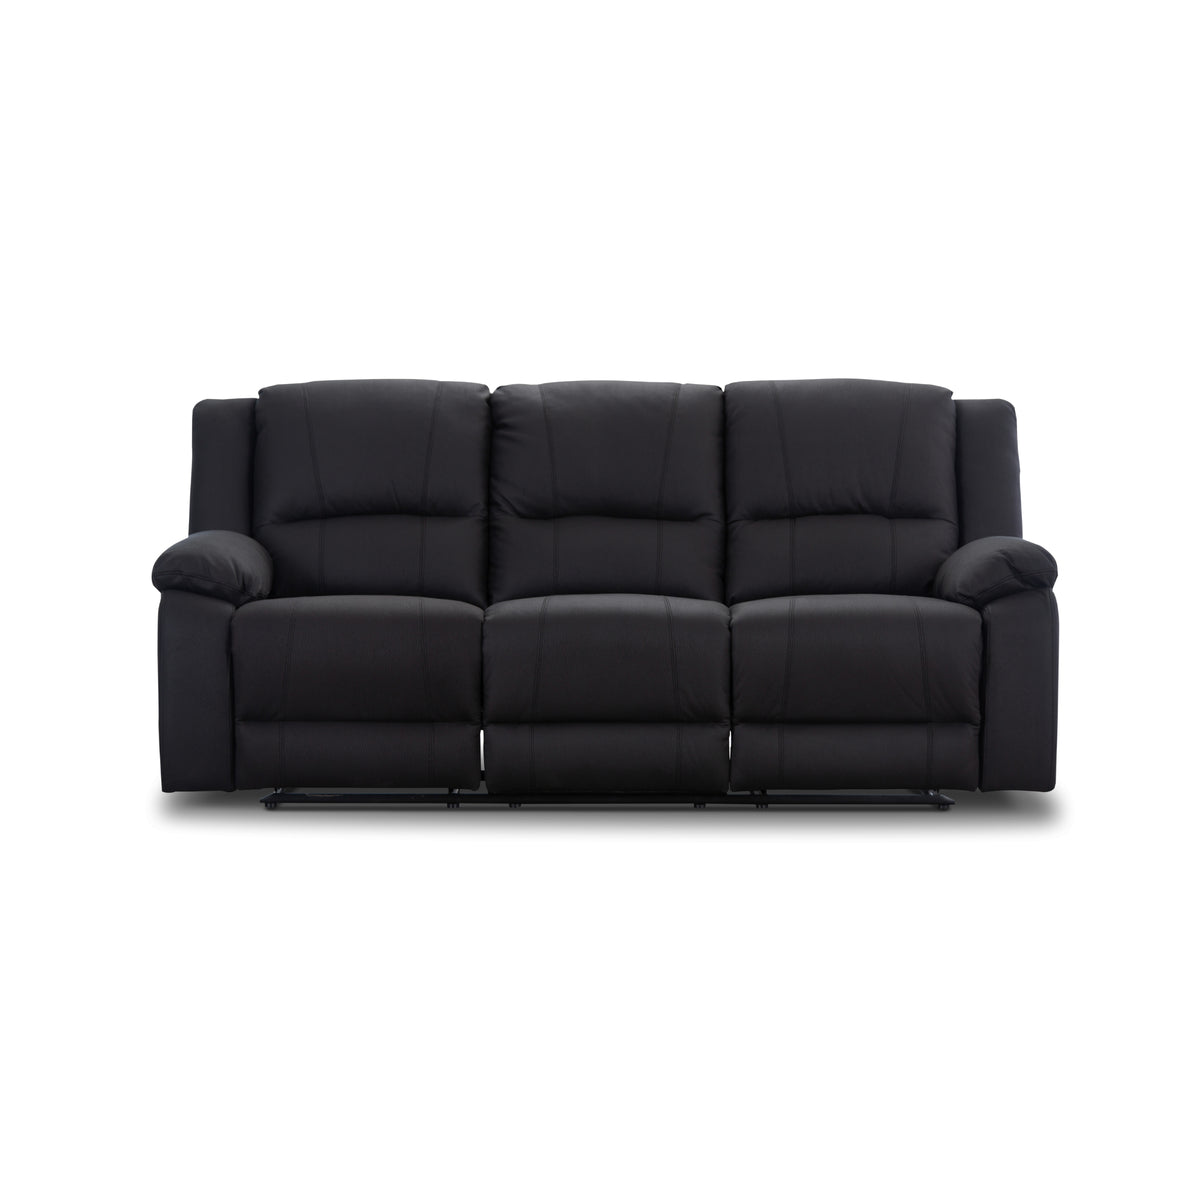 Anderson Fabric Electric Recliner Sofa Lounge Chair ONYX Black 3 Seater